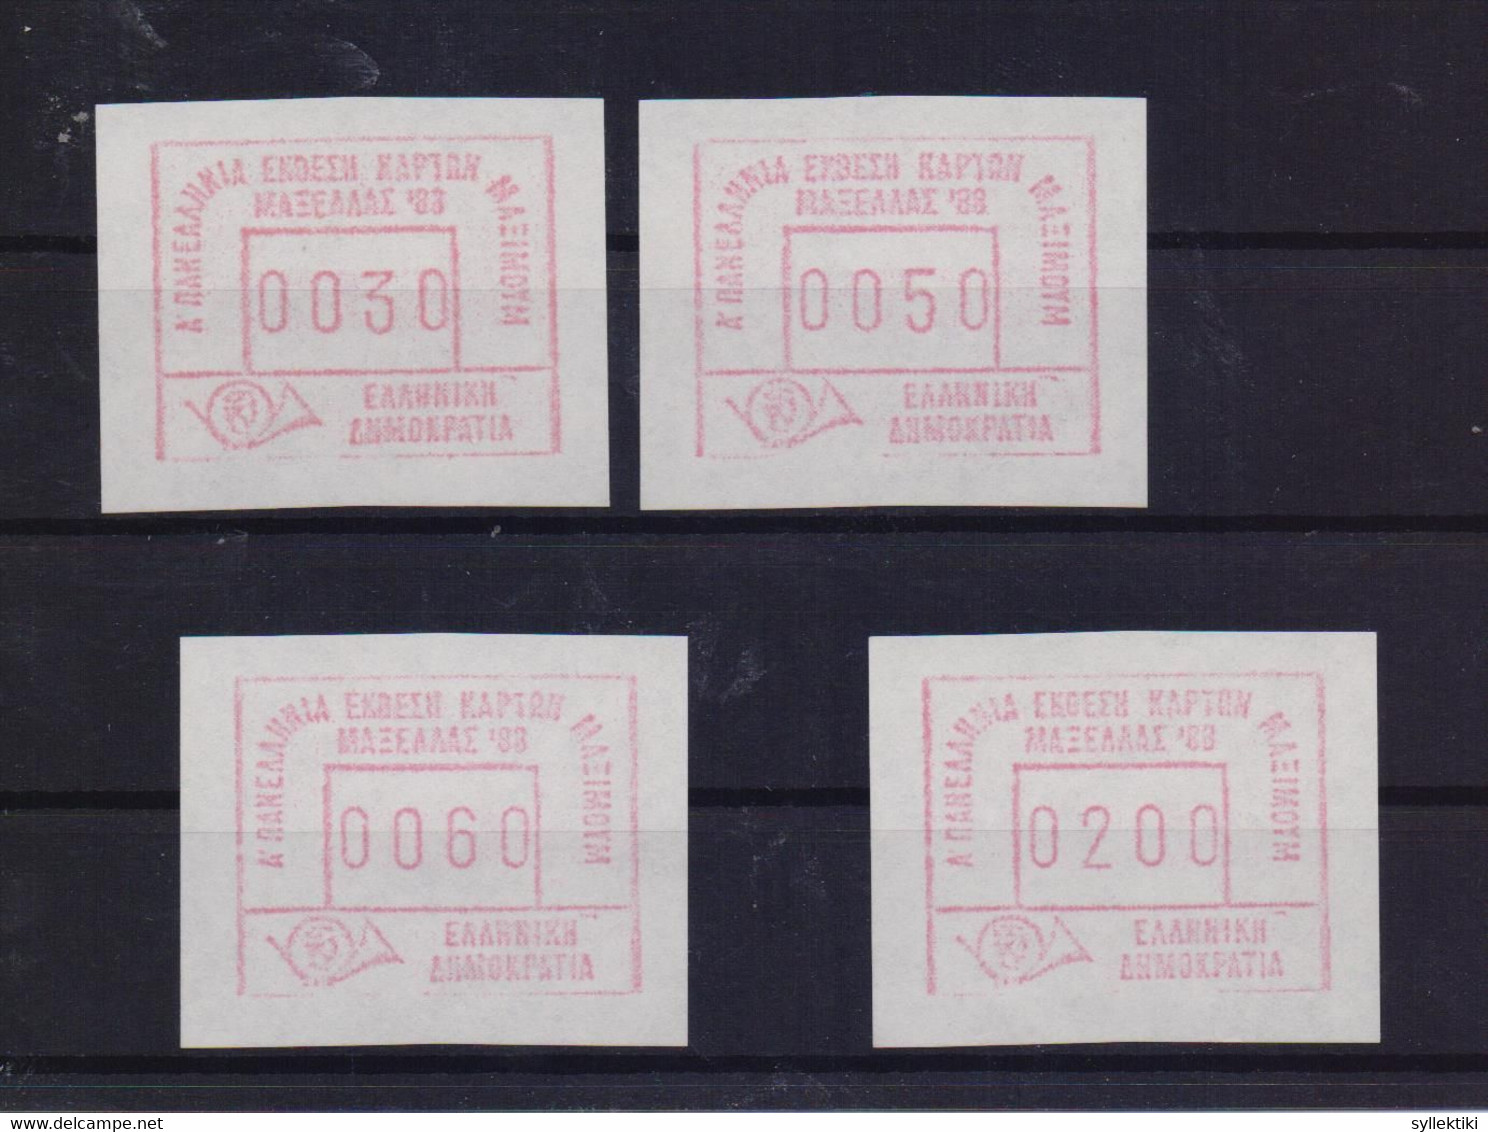 GREECE 1988 ATM FRAMA ΕΧΗΙΒΙΤΙΟΝ MAXELLAS'88 TYPE I COMPLETE SET OF 4 MNH STAMPS - Timbres De Distributeurs [ATM]